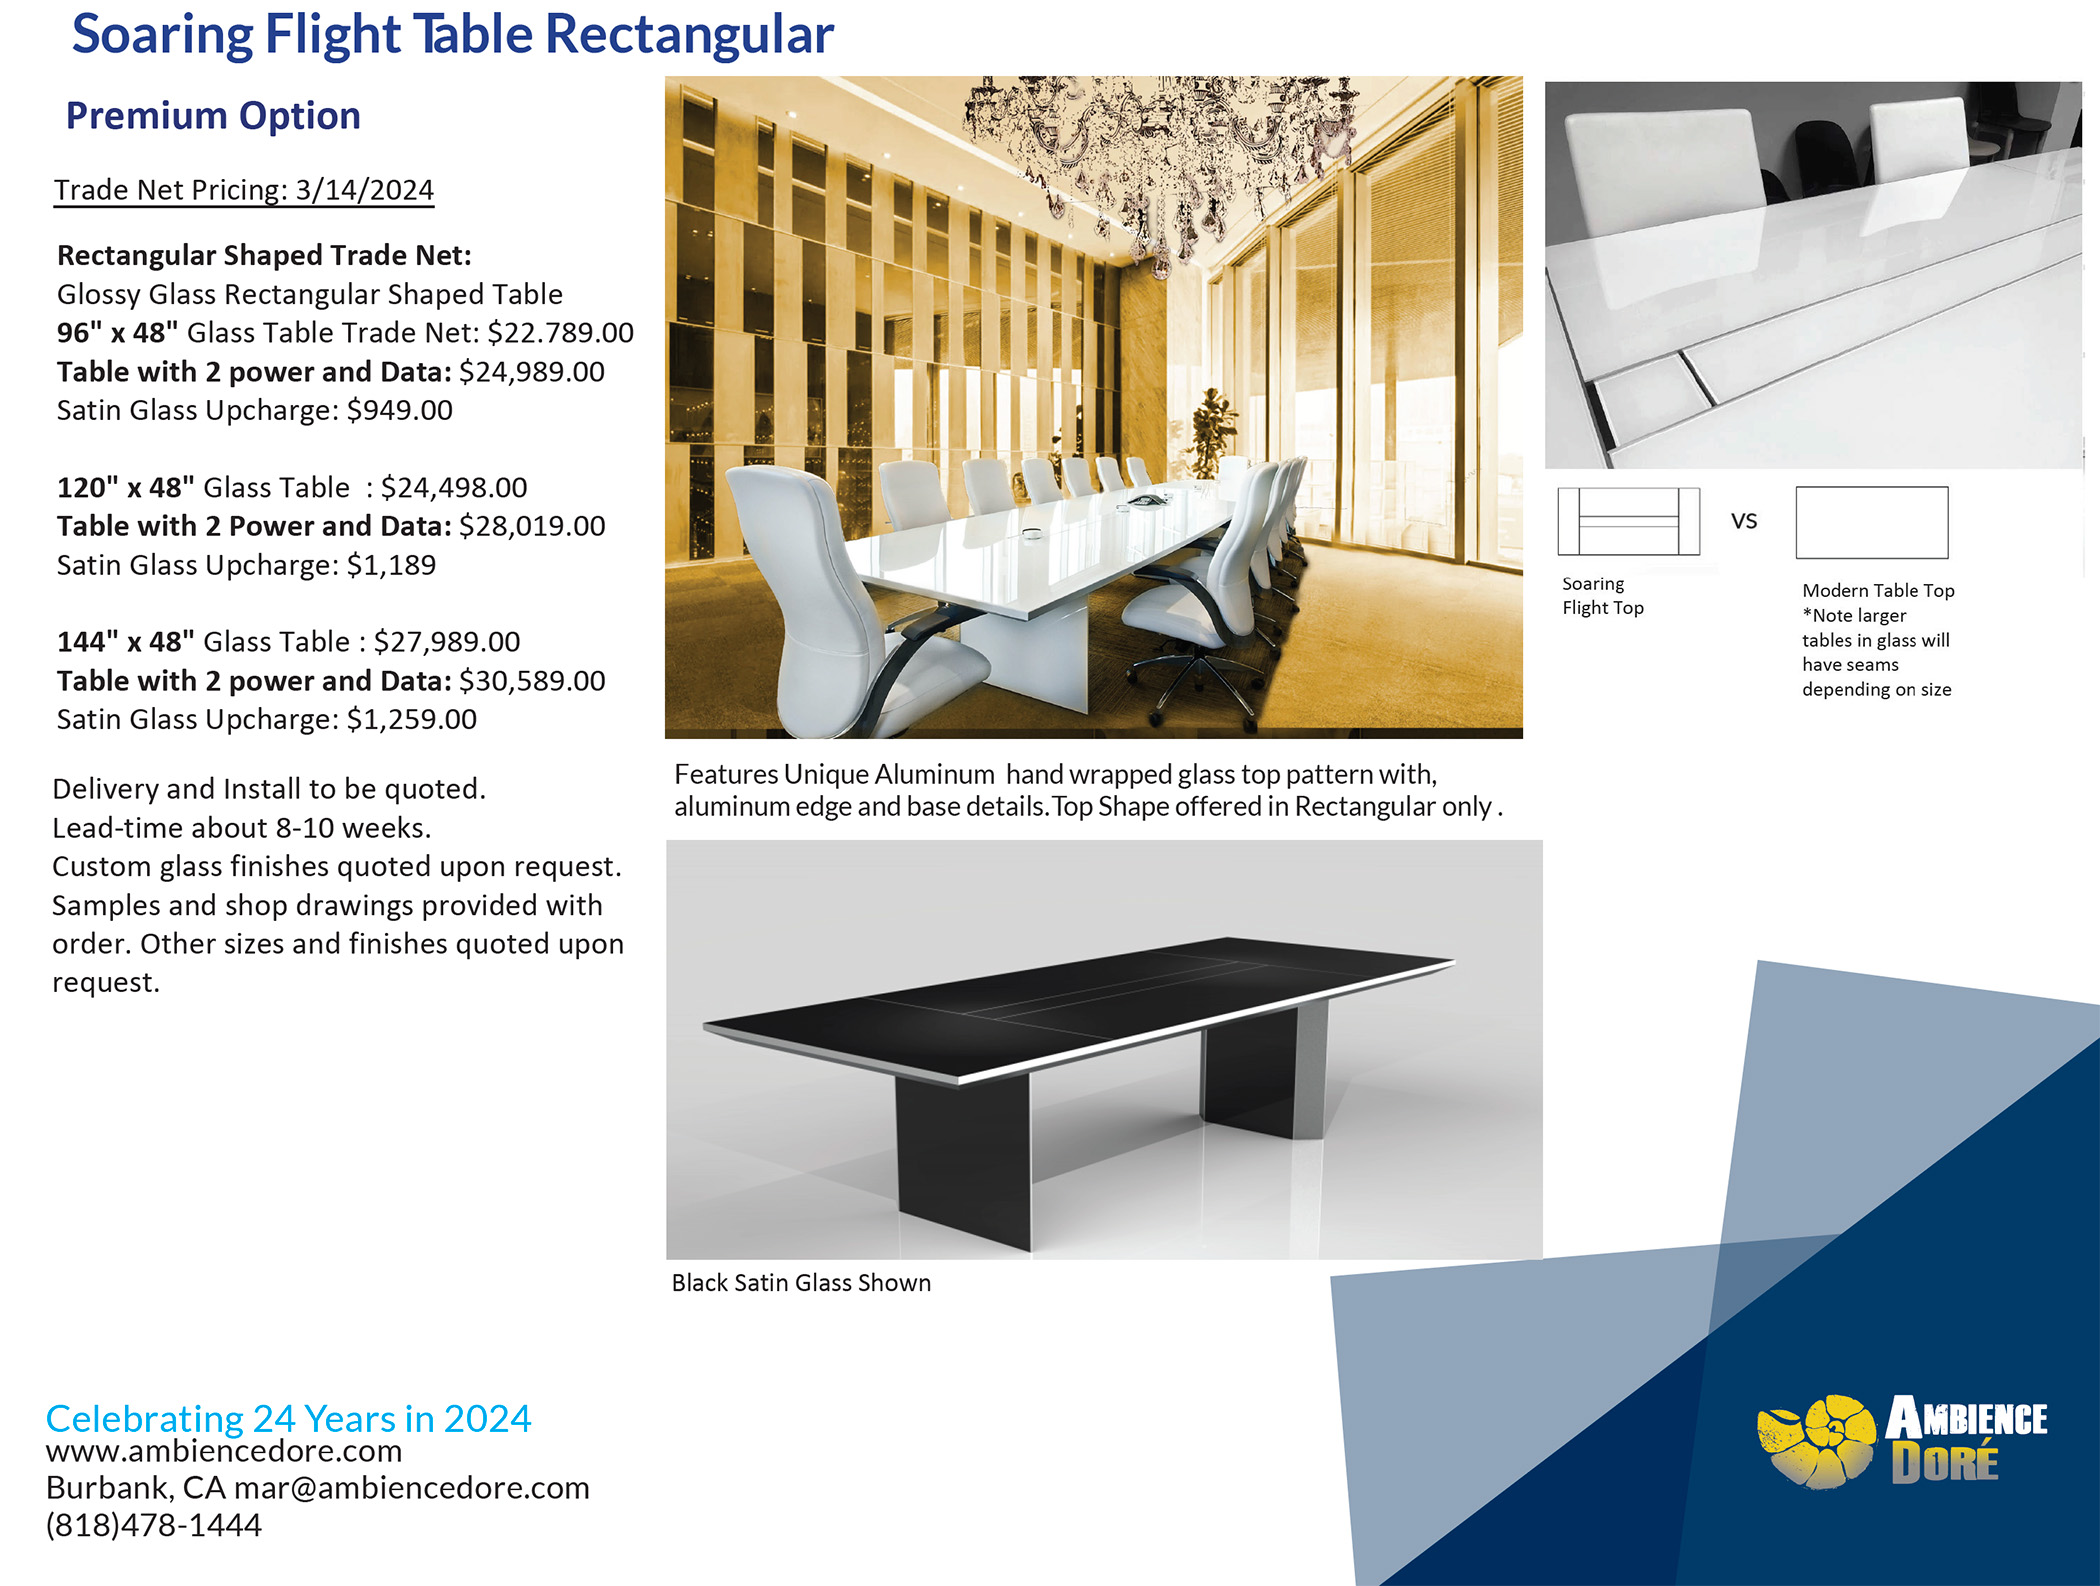 Soaring Flight White Glass Table 2024 starting price guide for the ultimate in premium glass conference tables with aluminum detailing